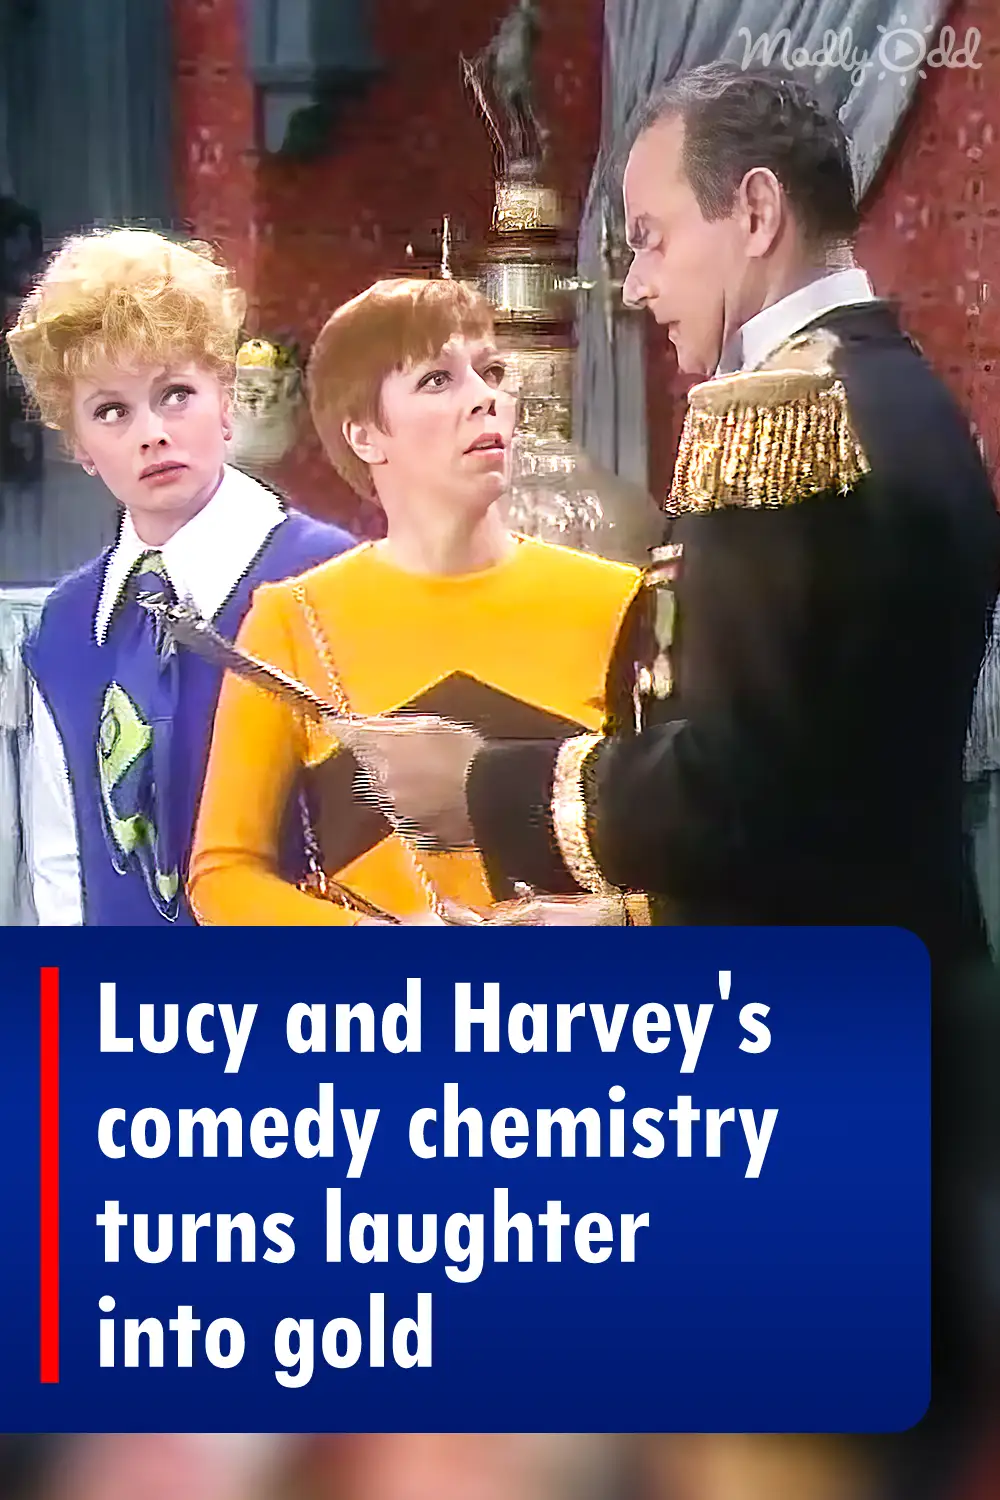 Lucy and Harvey's comedy chemistry turns laughter into gold